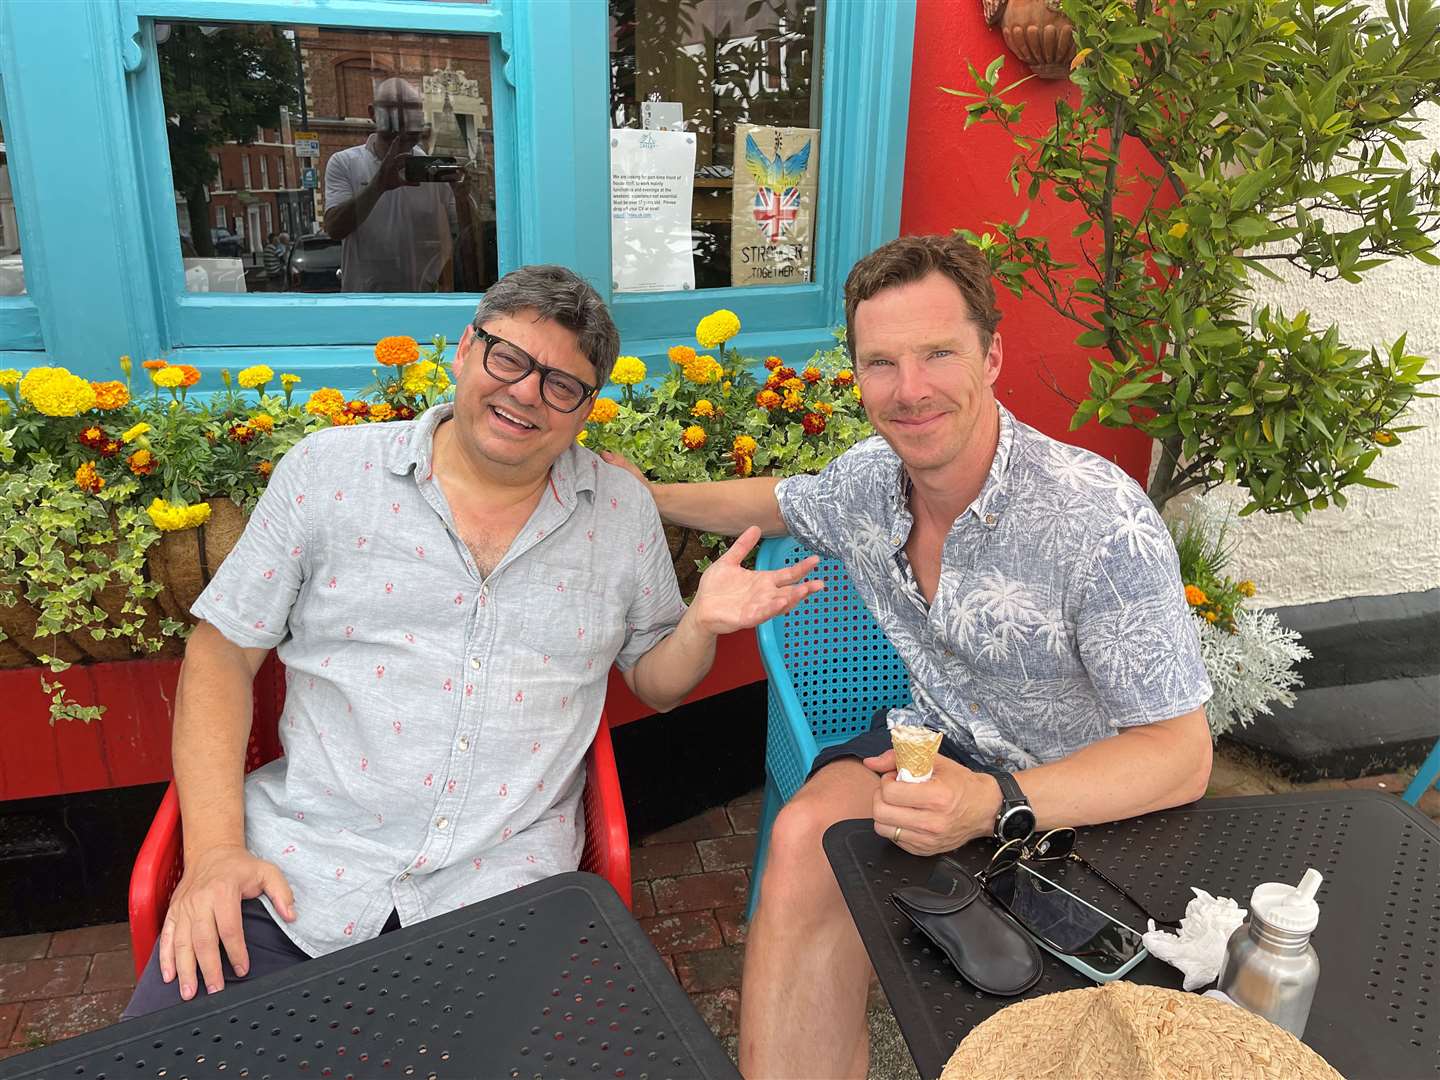 A-list star Benedict Cumberbatch was spotted in Suffolk during the summer. Picture: Ugur Vata